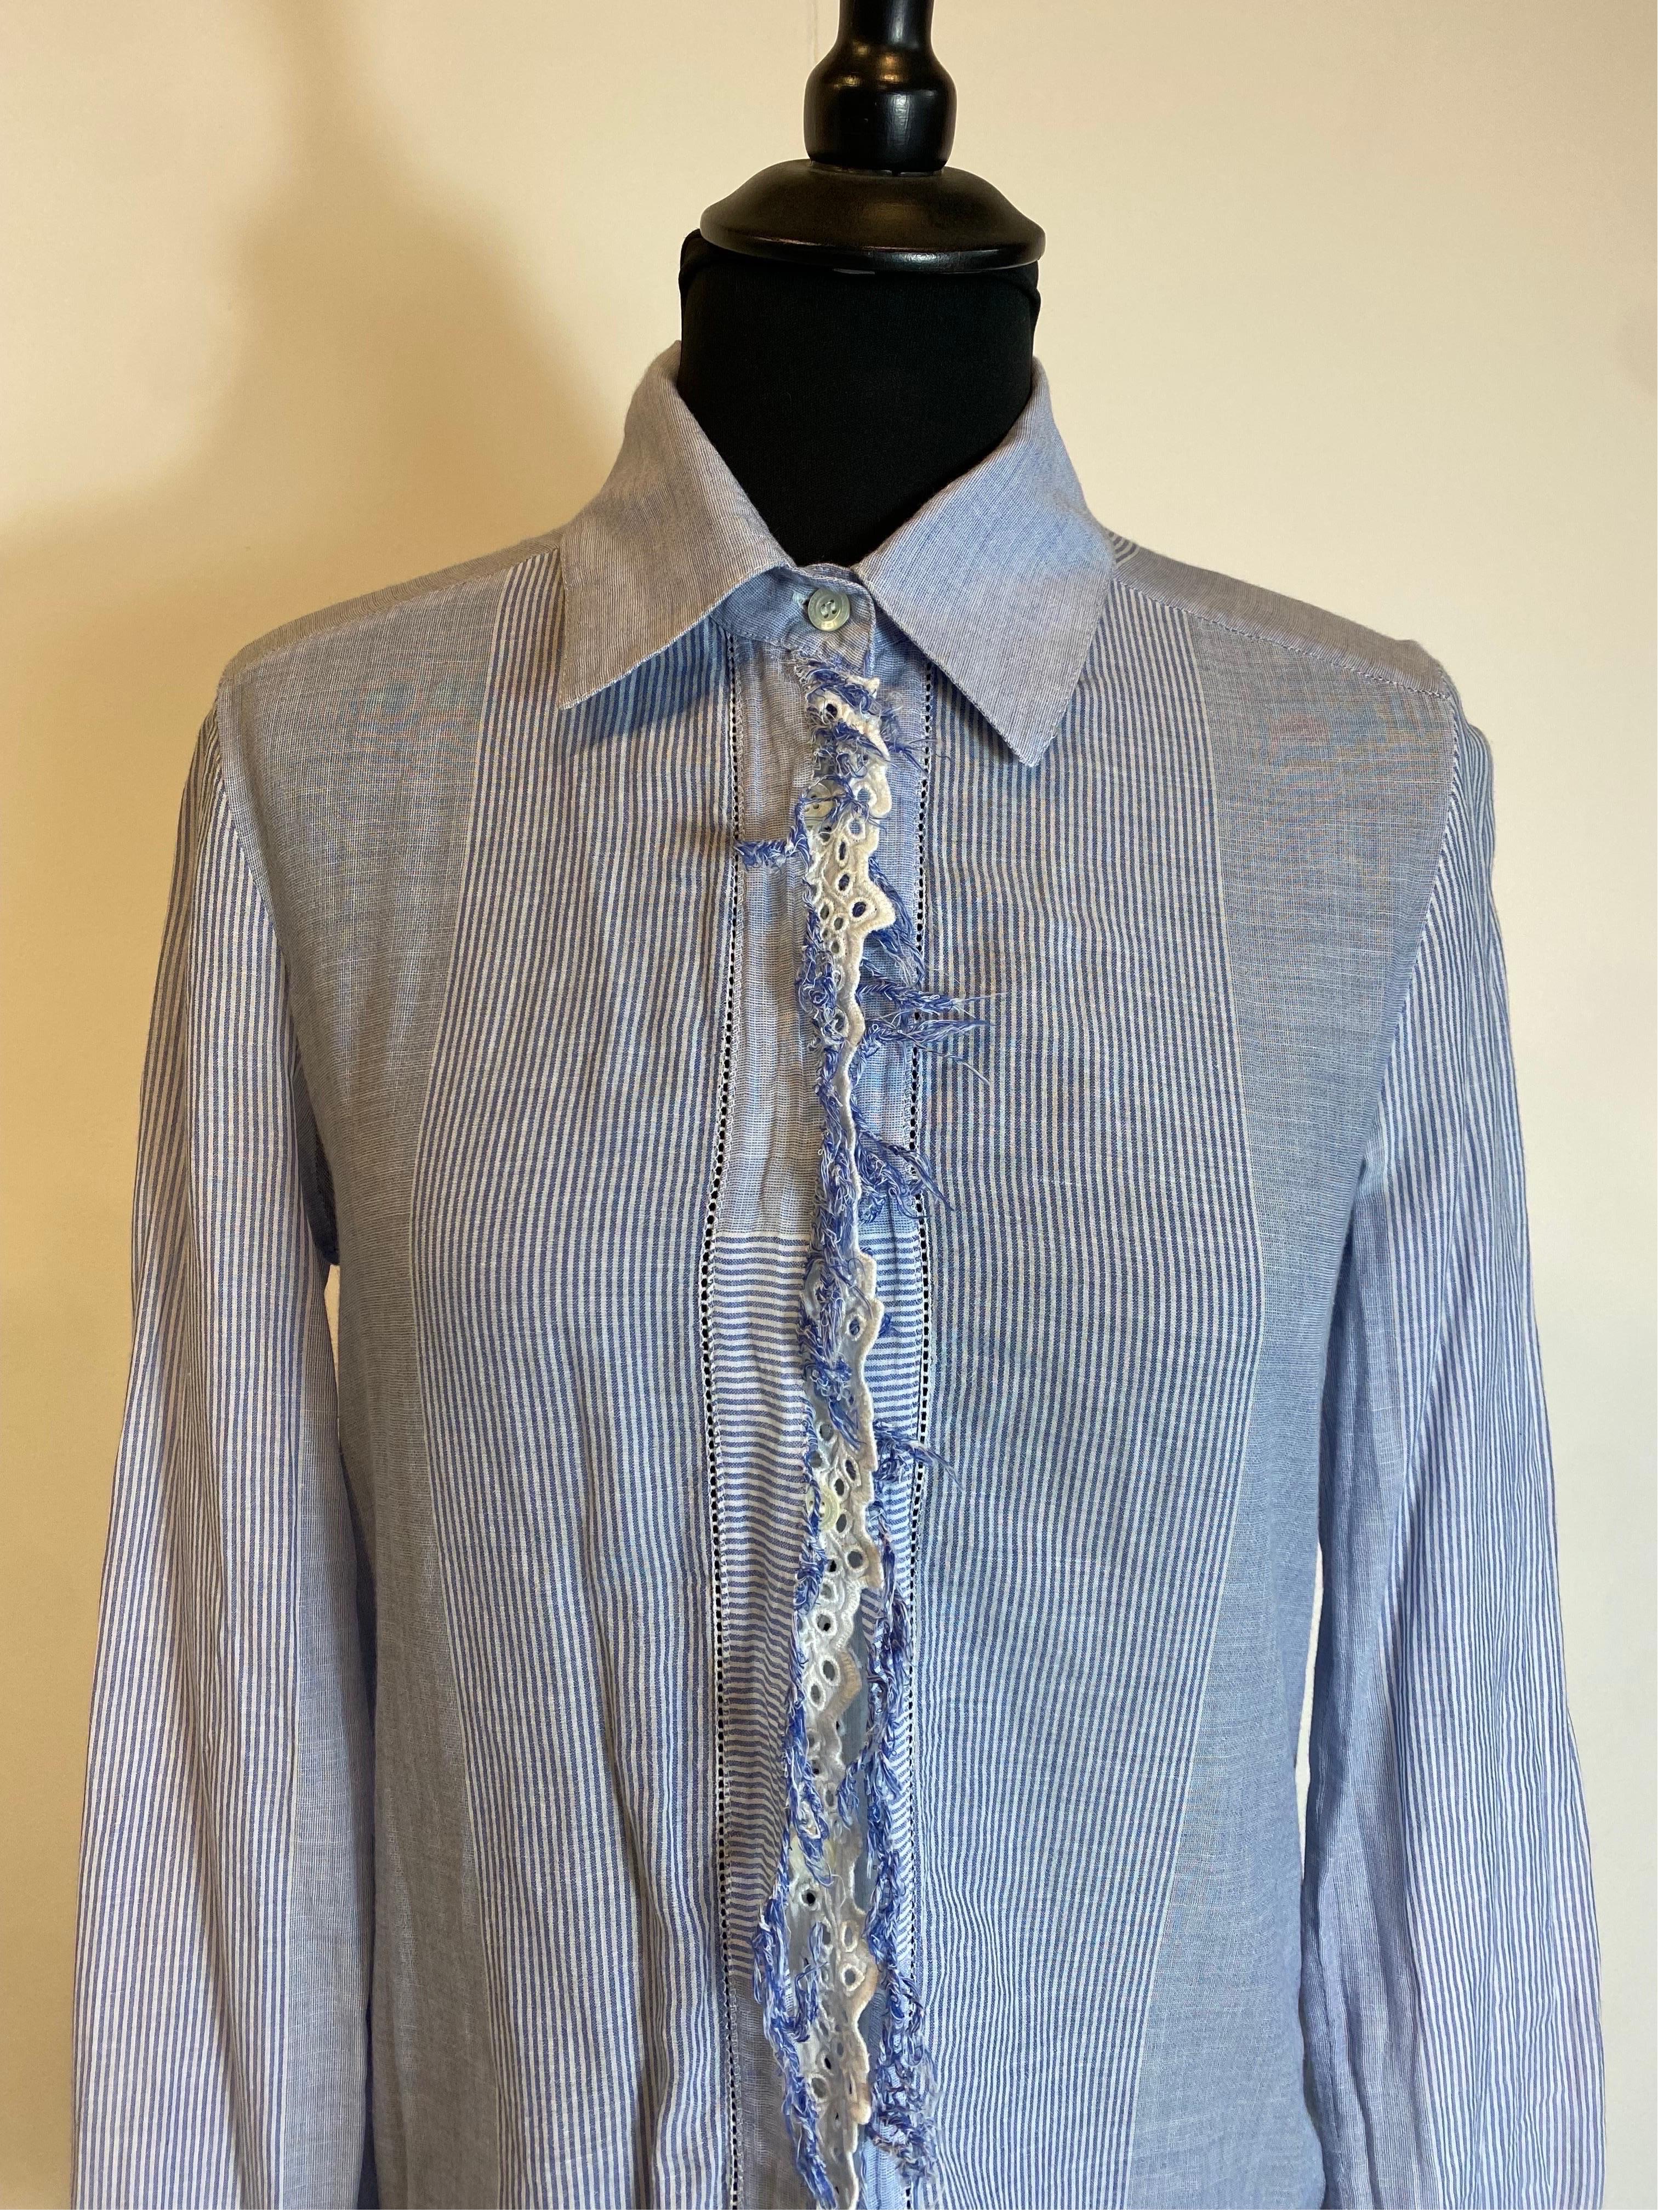 Ermanno Scervino light blue stripes Beachwear Shirt In Excellent Condition For Sale In Carnate, IT